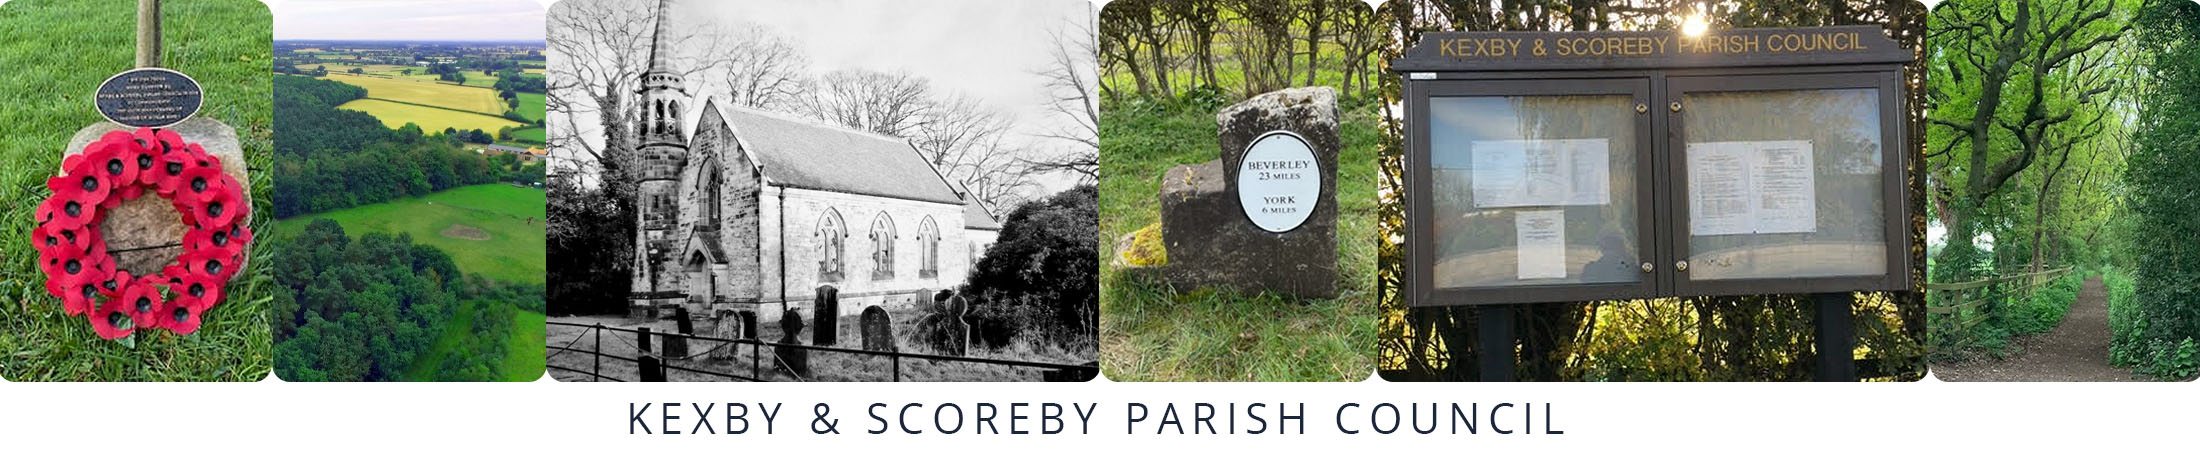 Header Image for Kexby and Scoreby Parish Counci